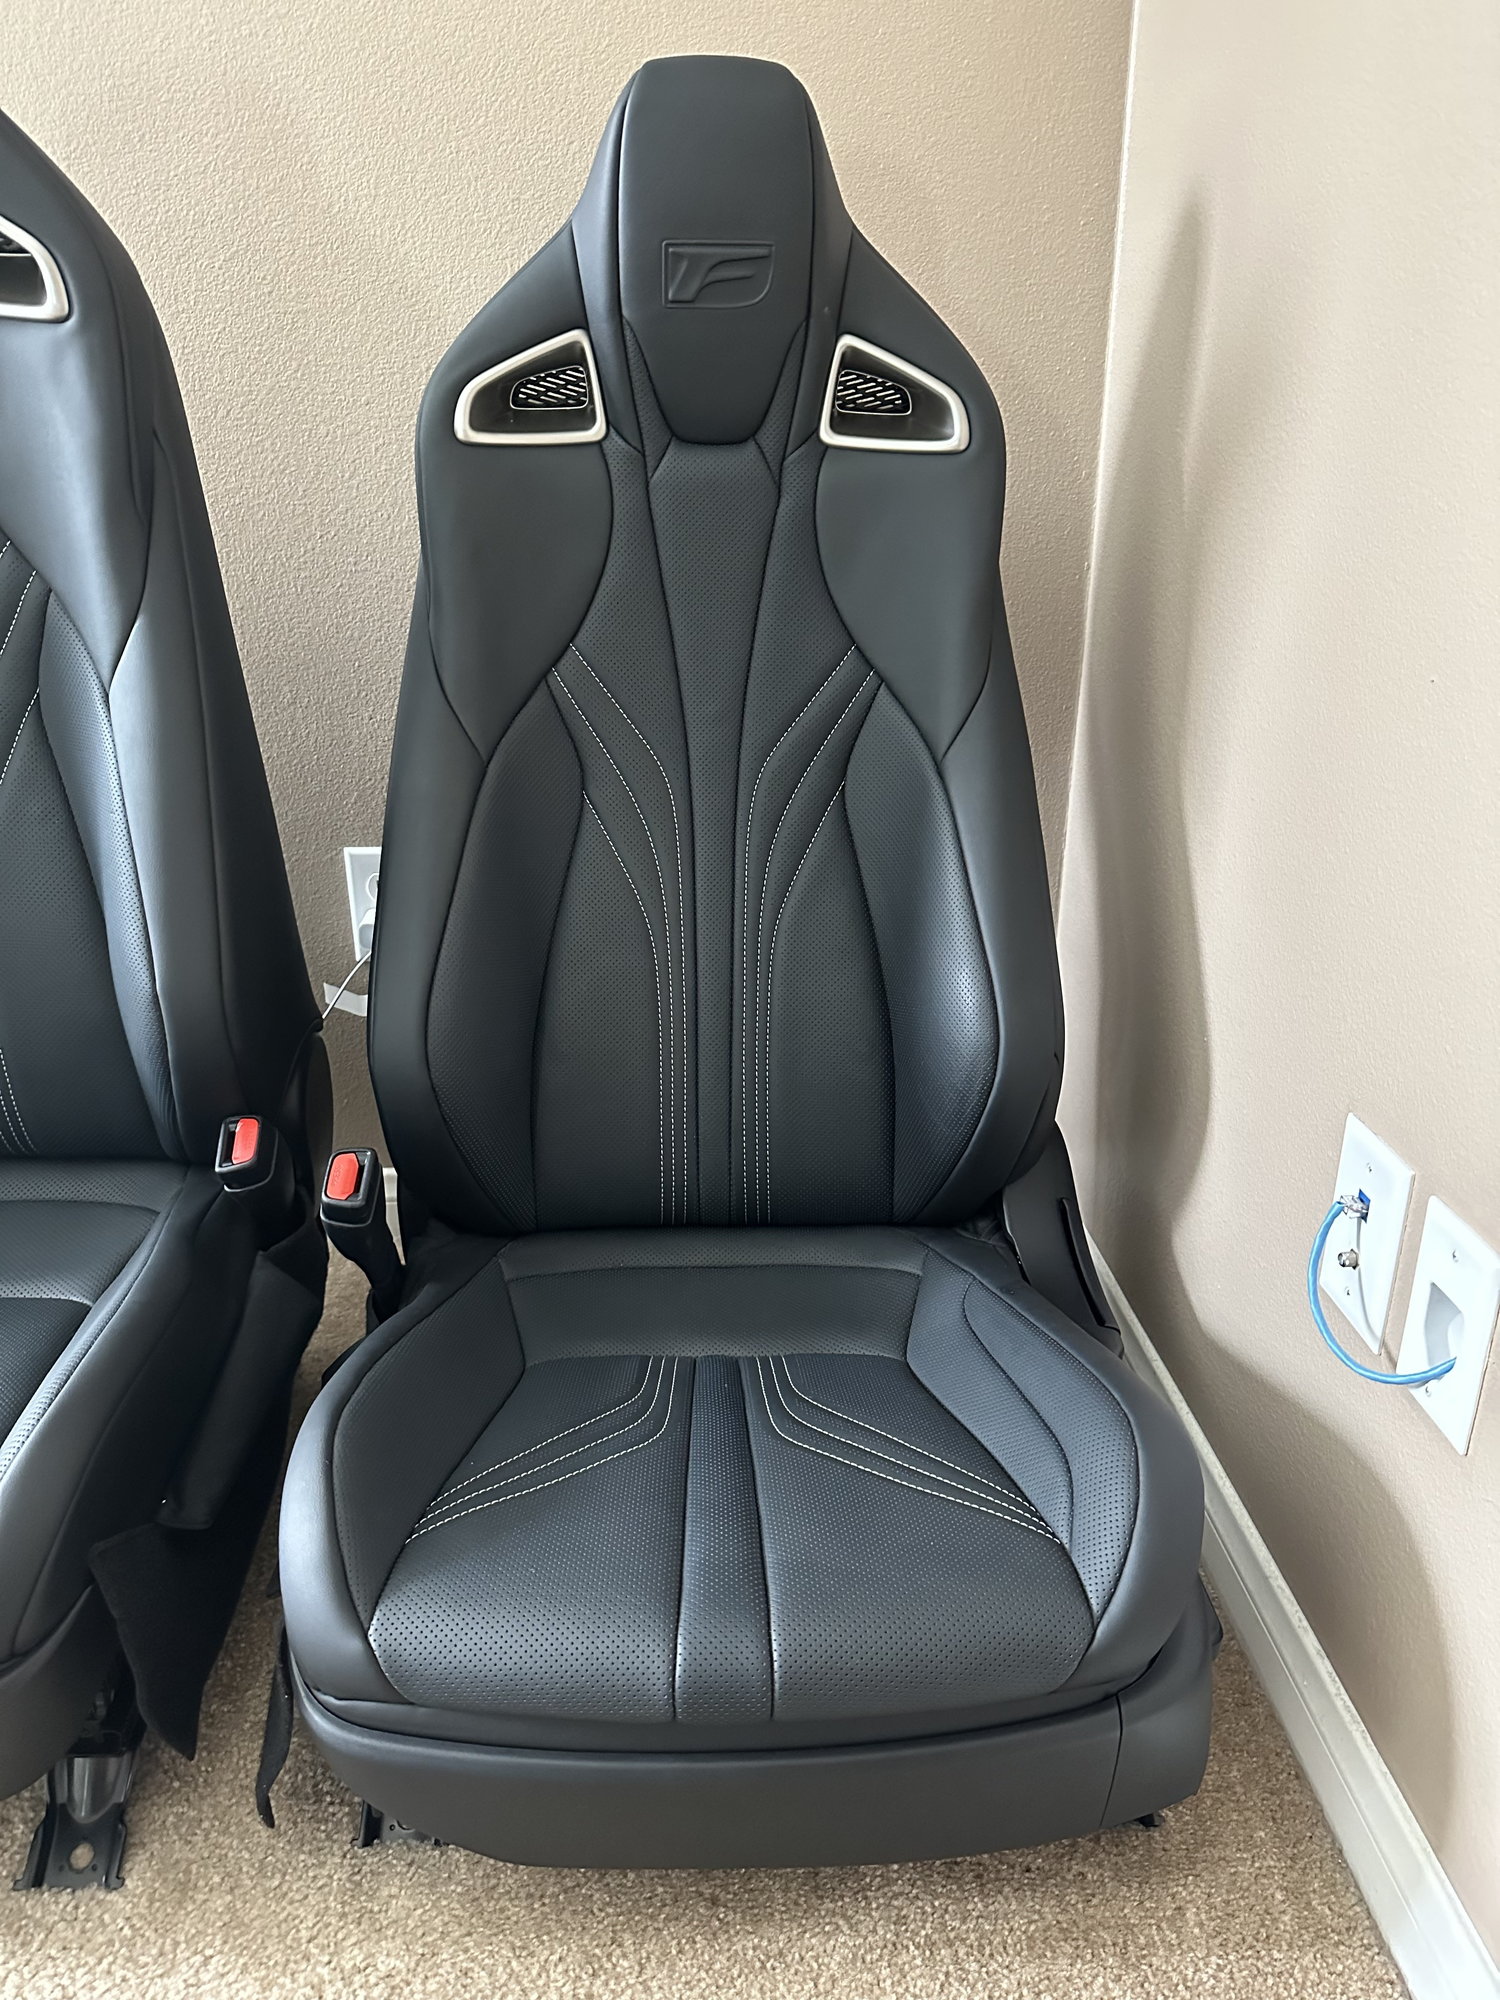 Interior/Upholstery - Lexus GSF Interior new OEM - New - All Years  All Models - Knoxville, TN 37774, United States